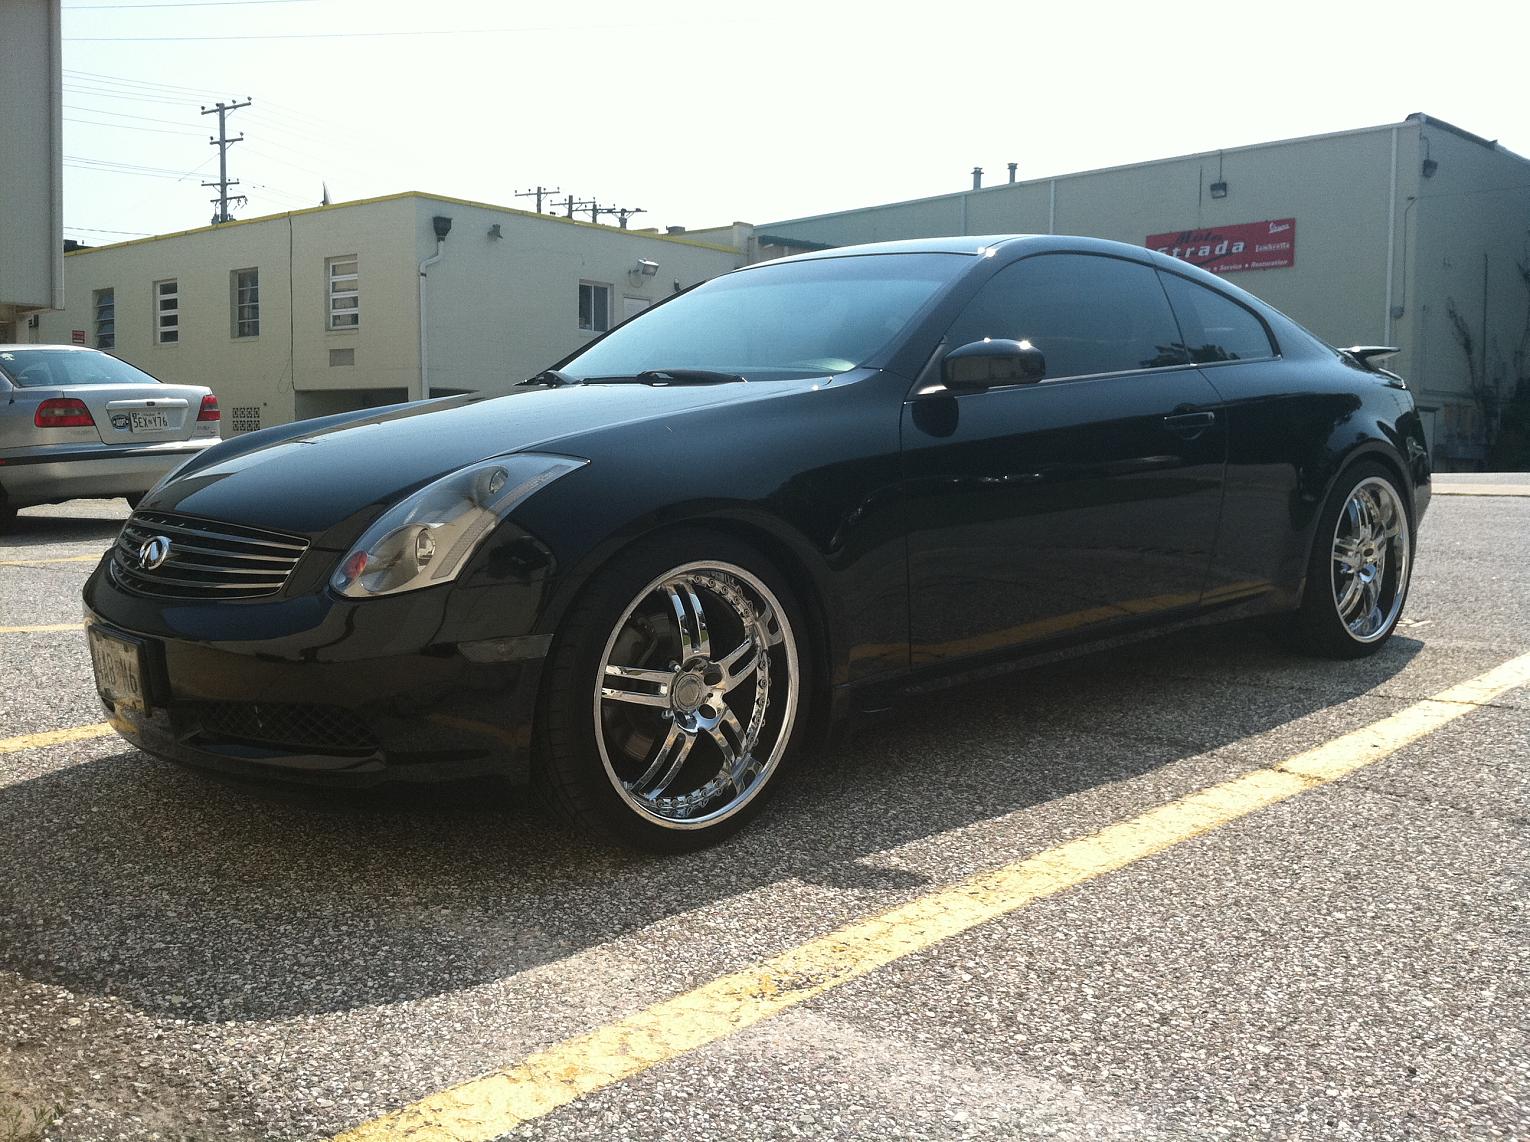 How much horsepower does a 2005 infiniti g35 have